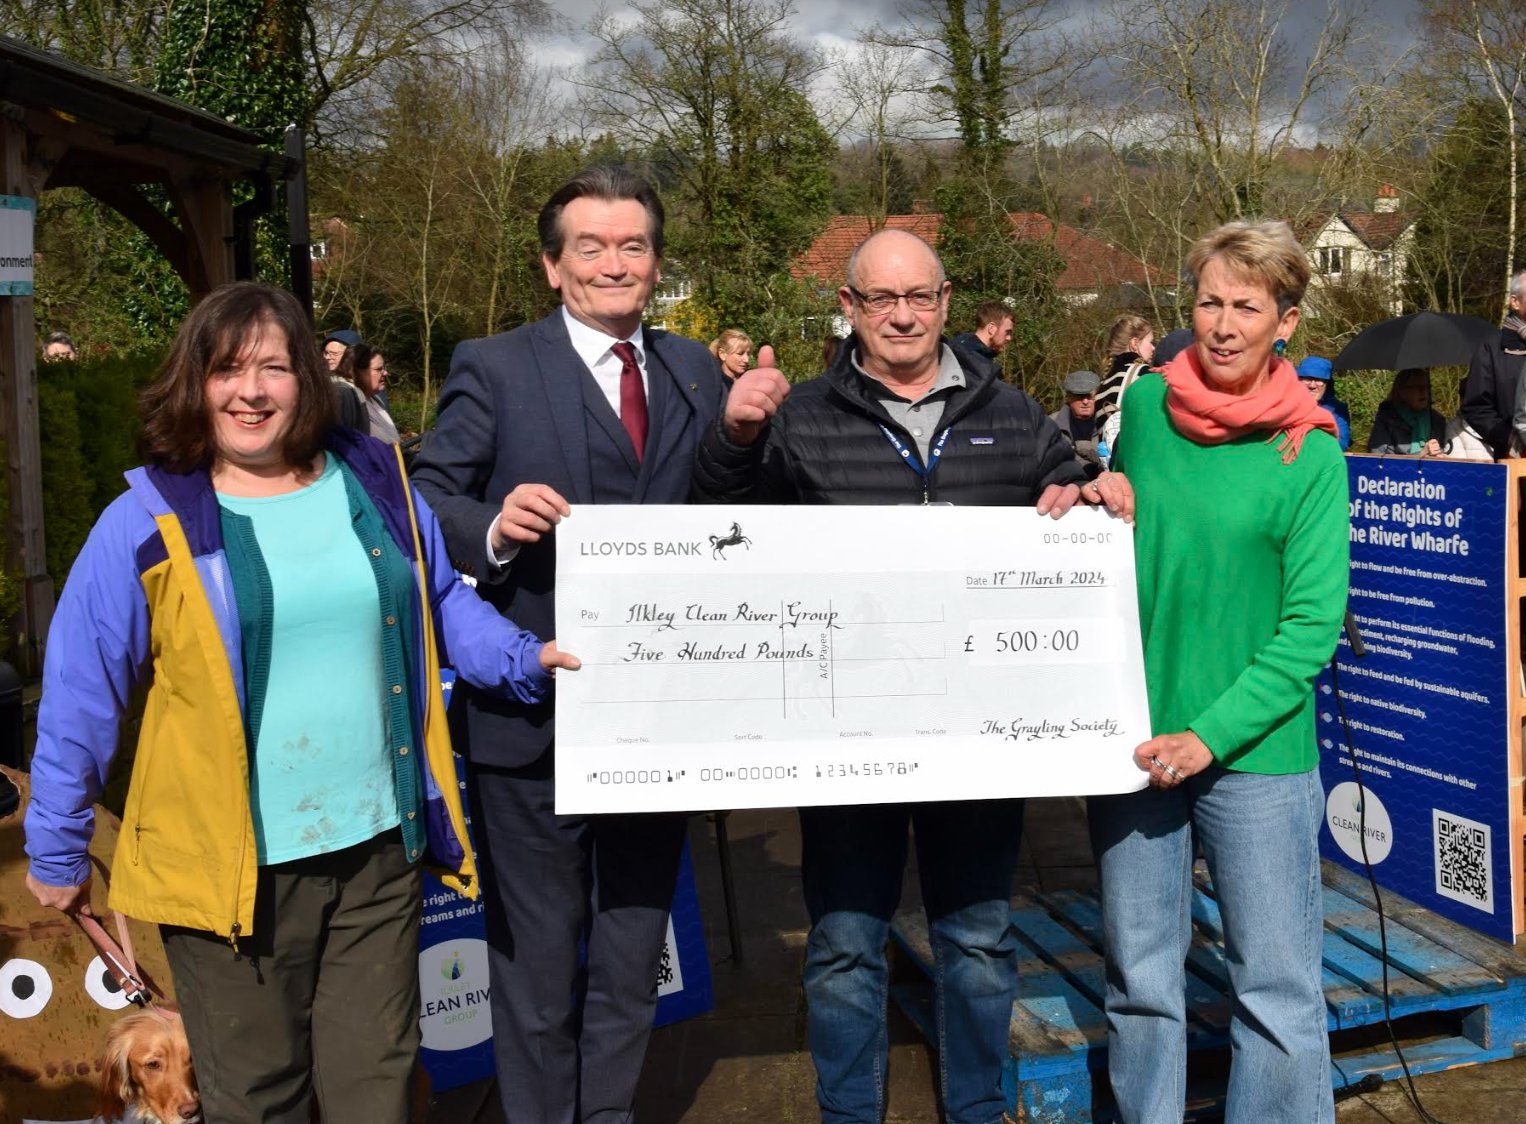 IlkleyCleanRiver on X: The Grayling Society has donated £500 to us to  support our campaign to ensure our rivers are fit for people and wildlife  after a presentation at the Society's Annual